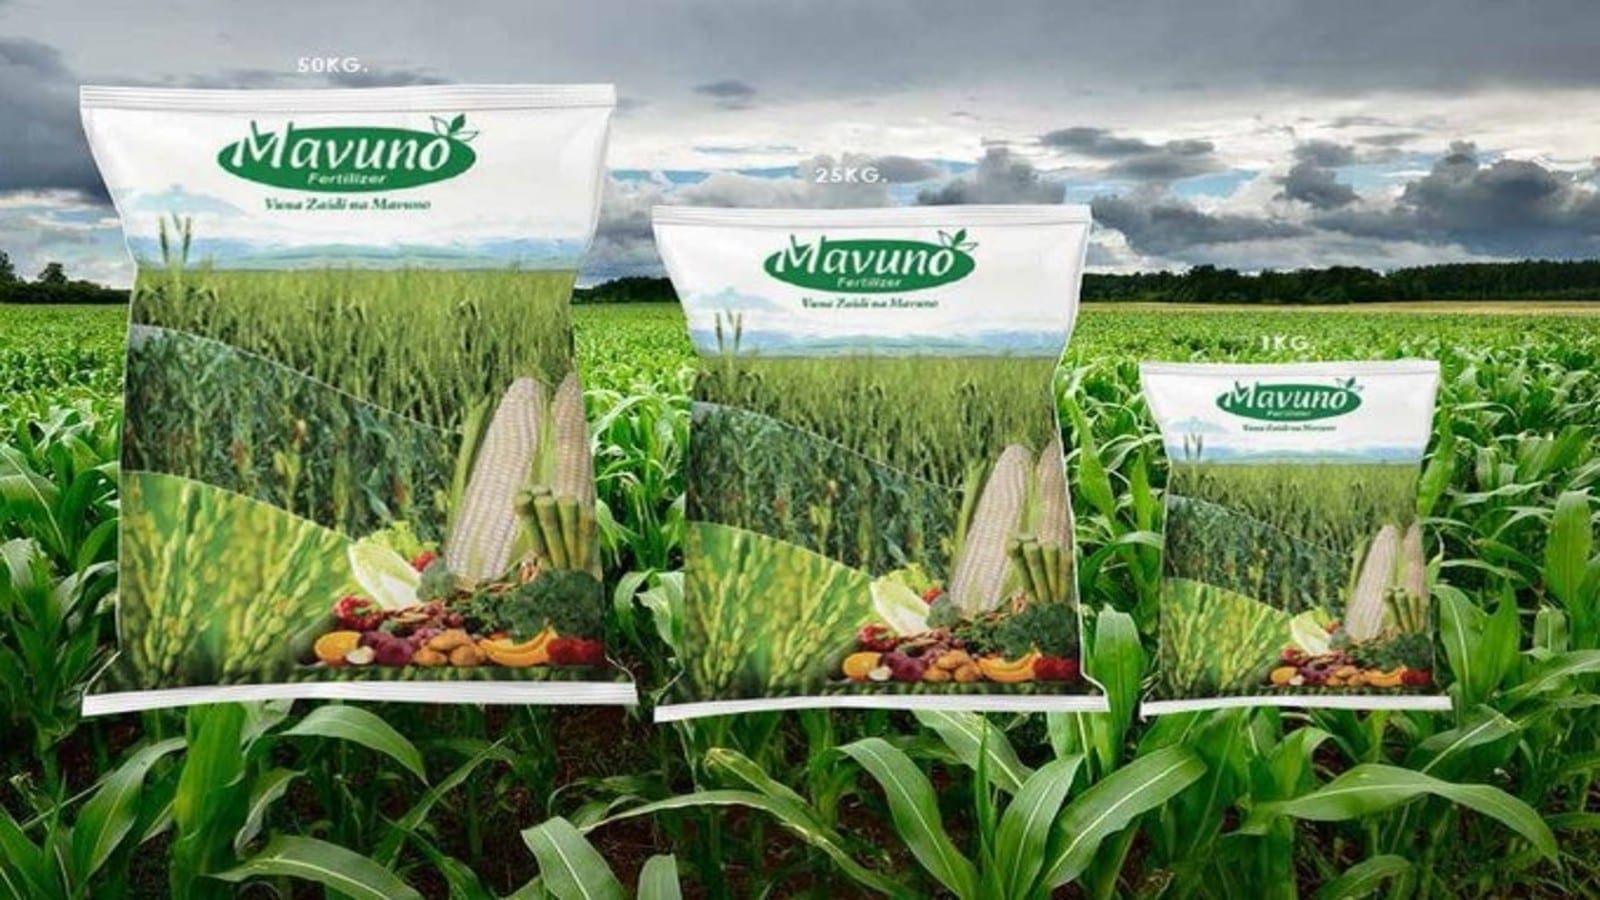 Kenya’s manufacturing giant Devki Group invests US$16m in new fertilizer plant, seeks to pump in US$46m to revive Mumias Sugar